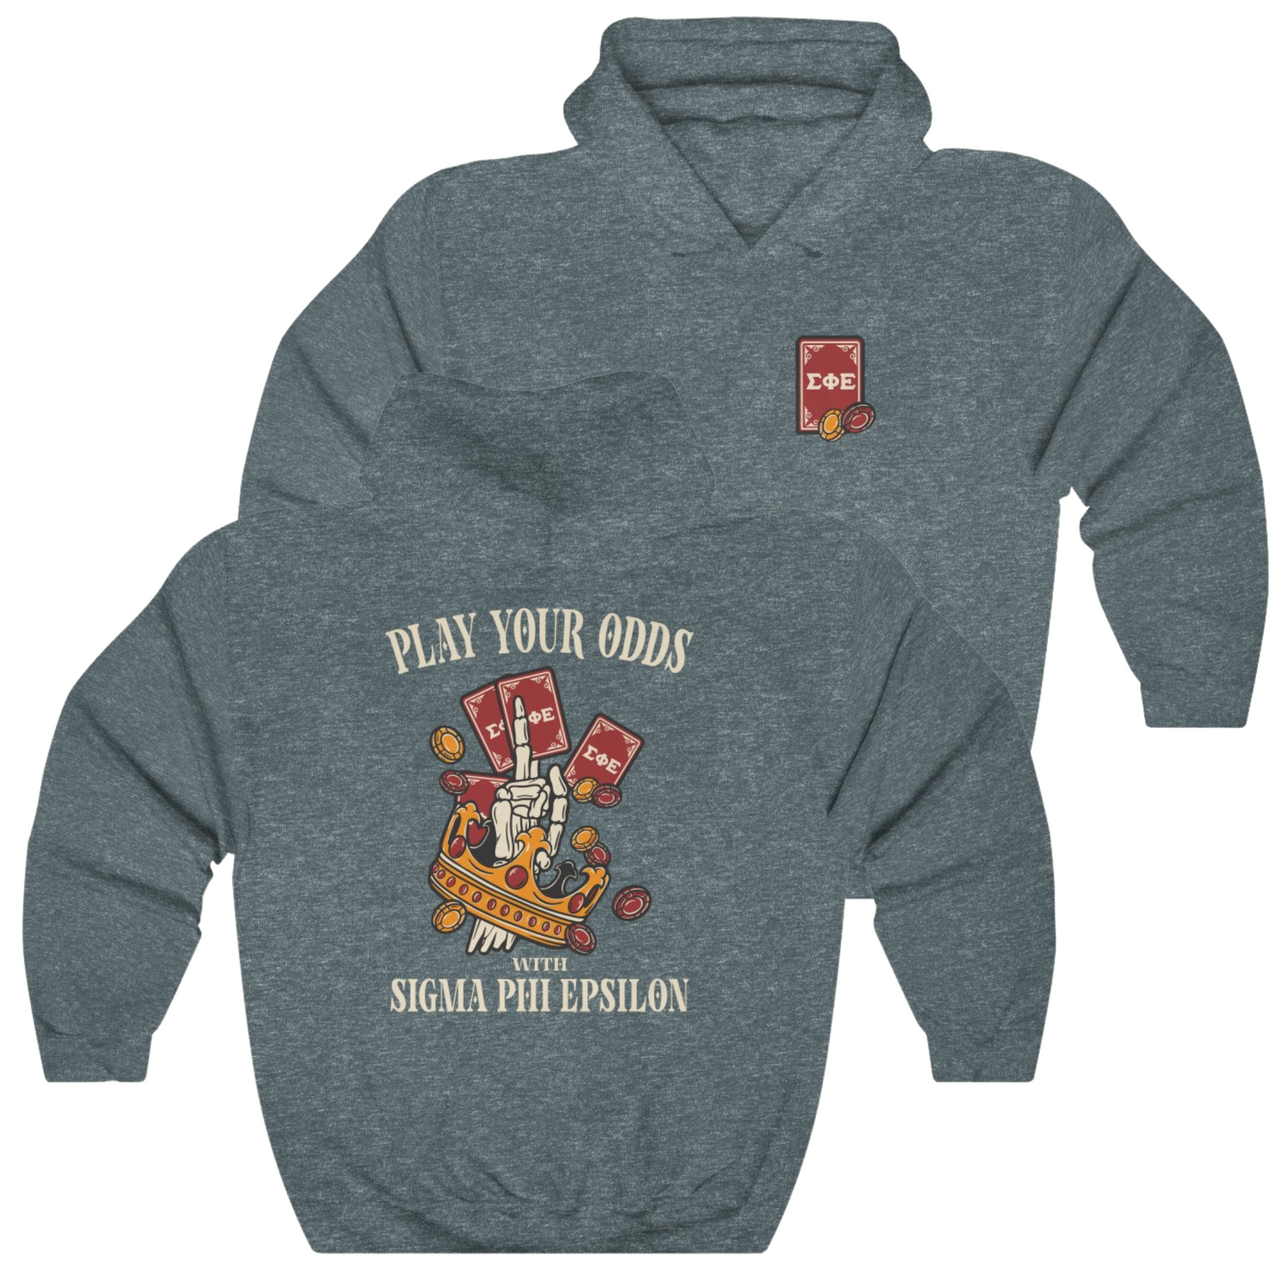 Grey Sigma Phi Epsilon Graphic Hoodie | Play Your Odds | SigEp Clothing - Campus Apparel